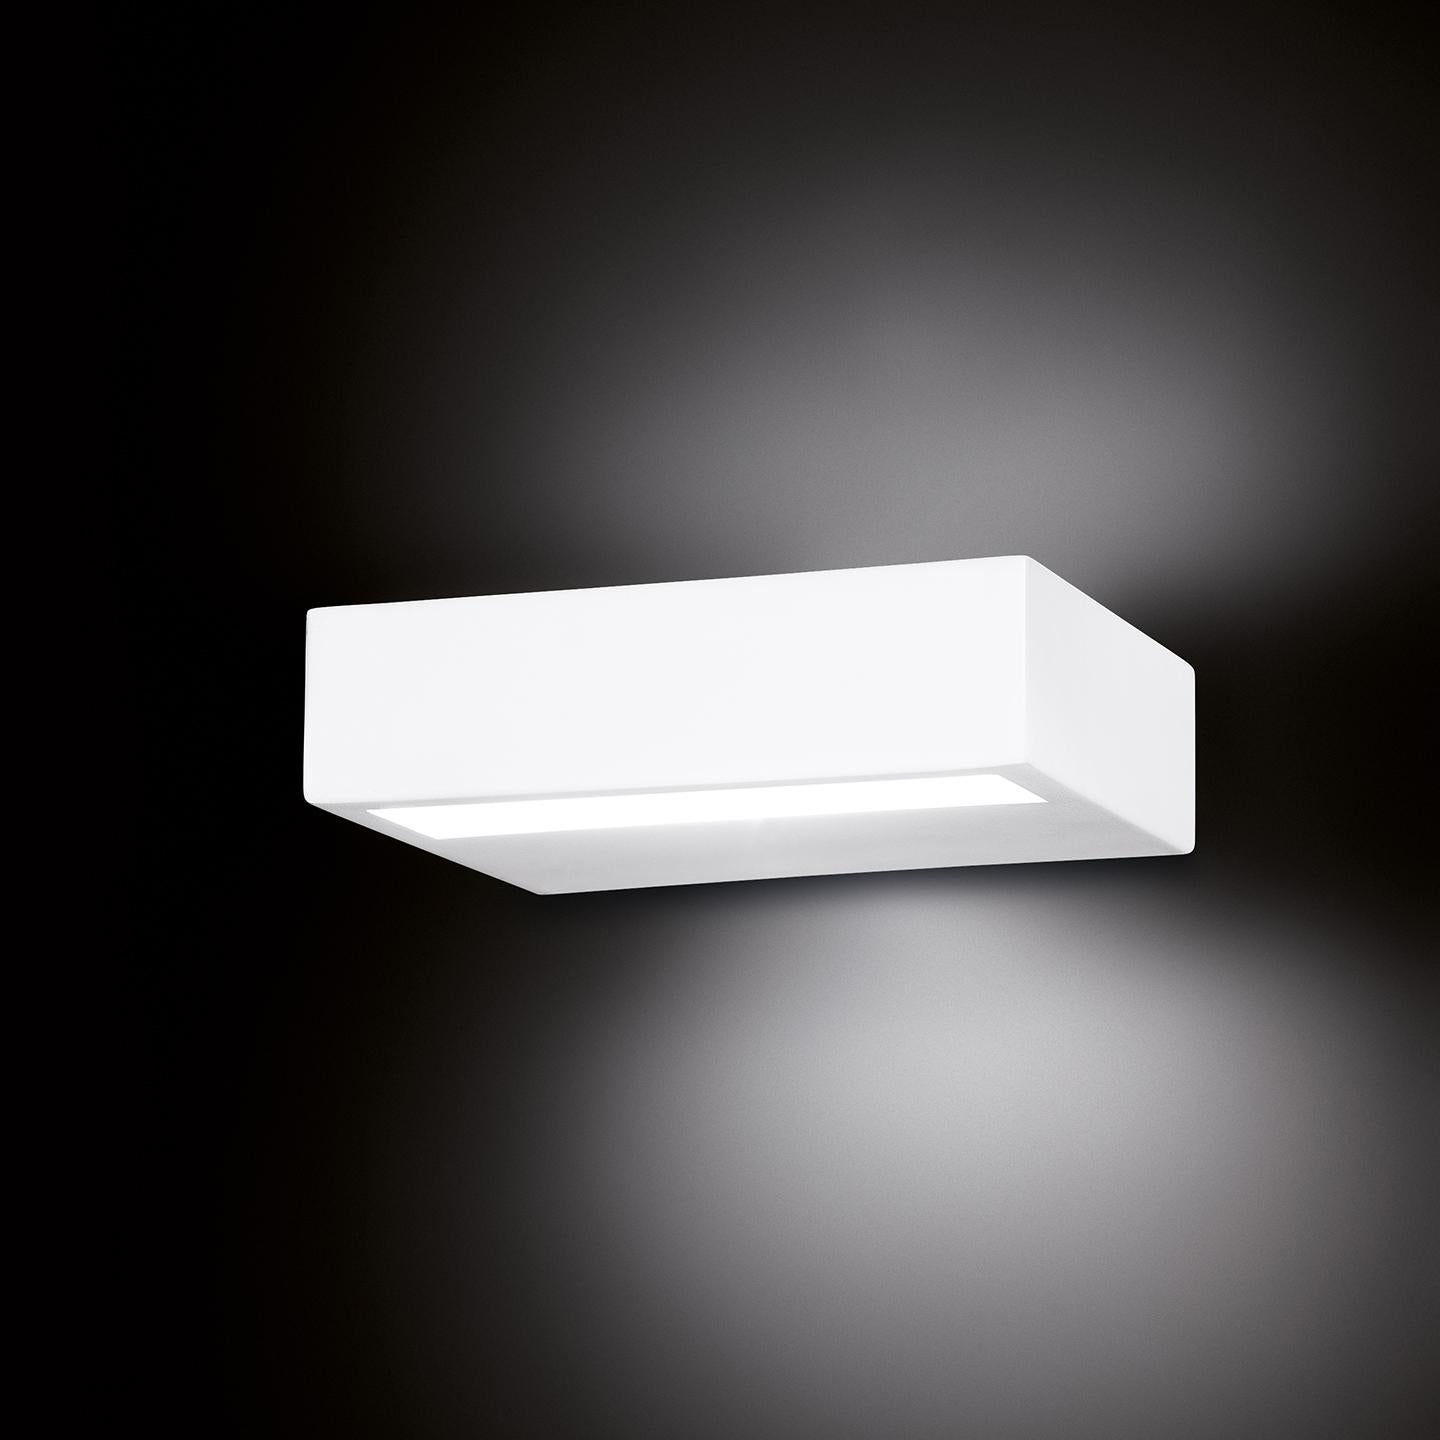 Designed in 2004 by Design Works Studio (Tonetto and Lazzati), Alias Wall Lamp is a beautiful, minimal piece with clean lines. Its sleek design and integrated LED light source is perfect for a wide array of projects. Available in brushed nickel,